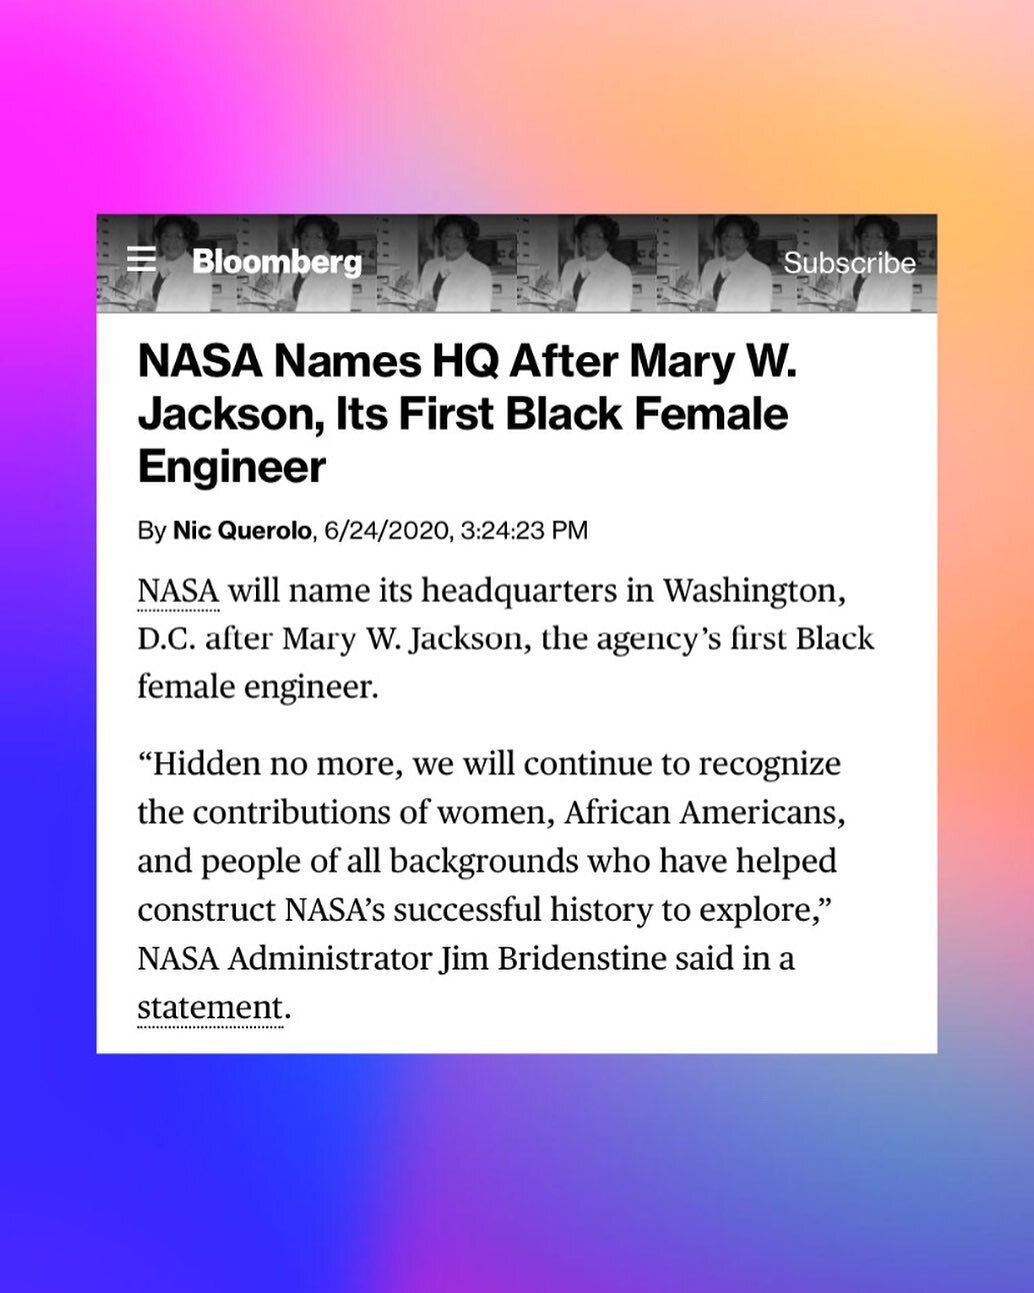 ✨In an extraordinary press release from @nasa yesterday, the agency announced the renaming of its headquarters building in Washington, D.C. to be named after Mary W. Jackson, the first African American female engineer at NASA. 👏🏽🪐
.
✨Mary W. Jacks